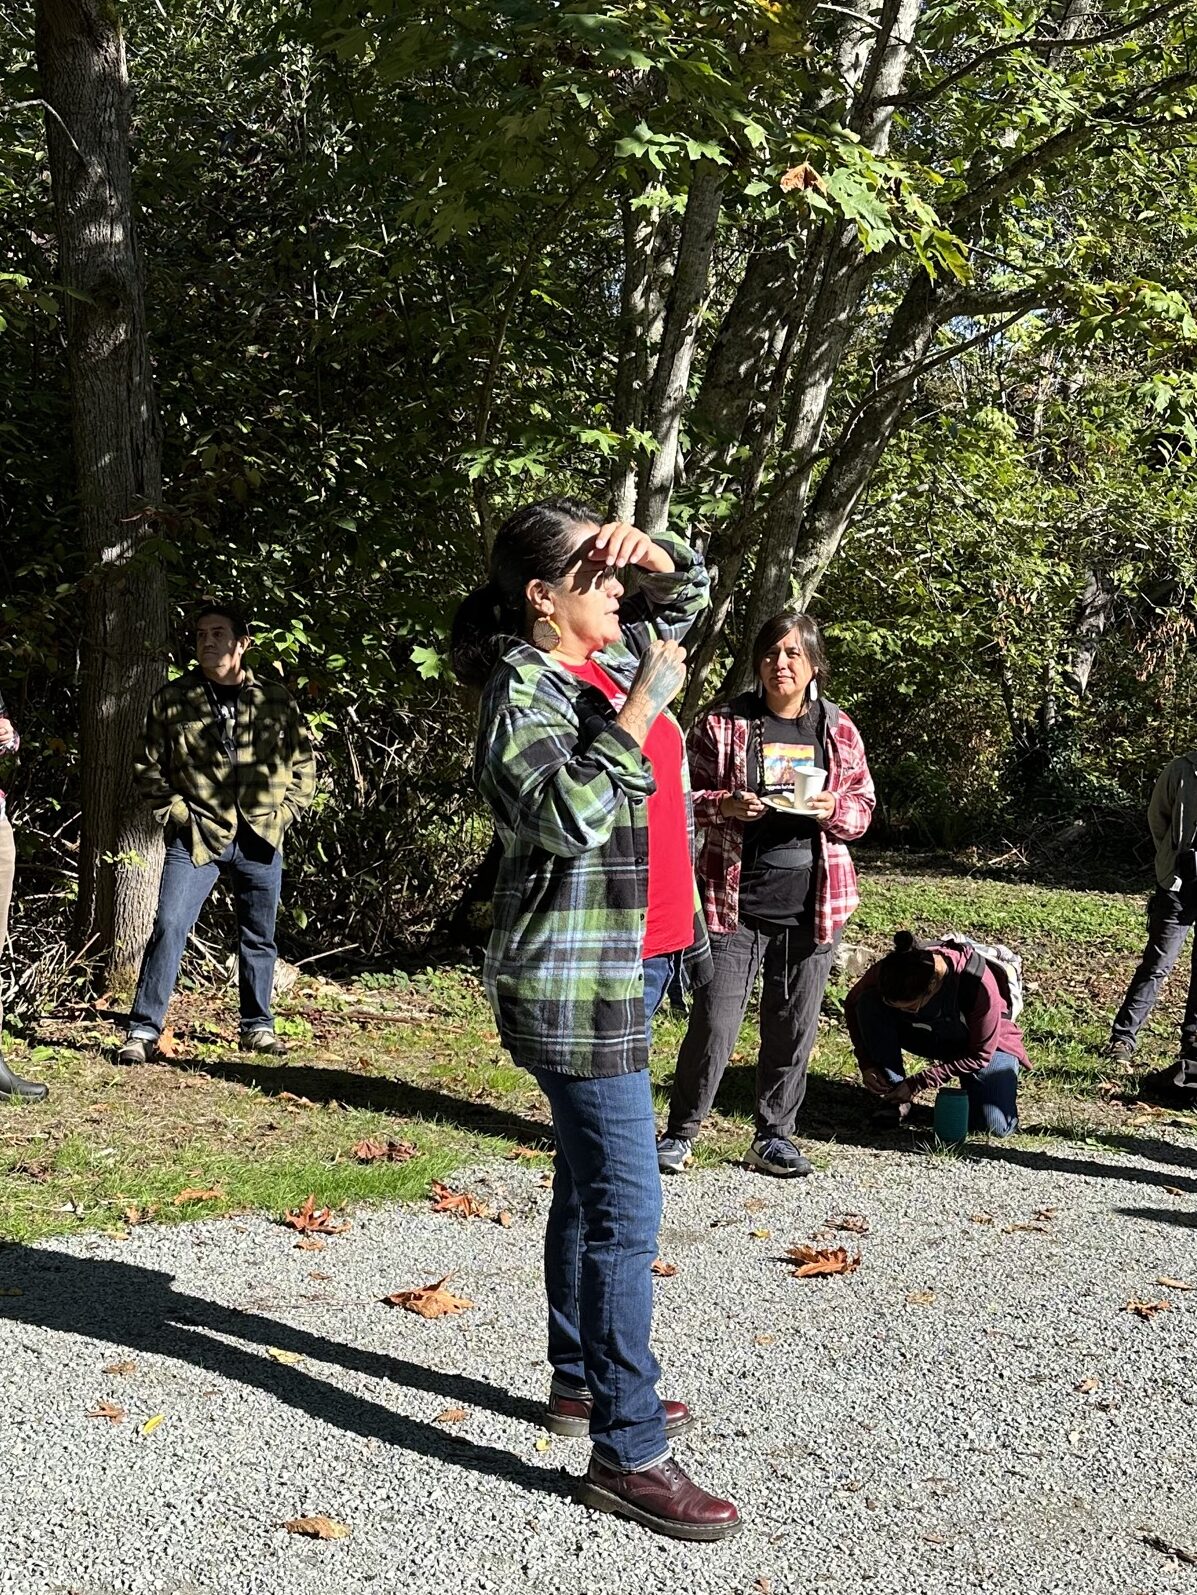 An image of a person in a green plaid flannel and red shirt speaking to a group of people.